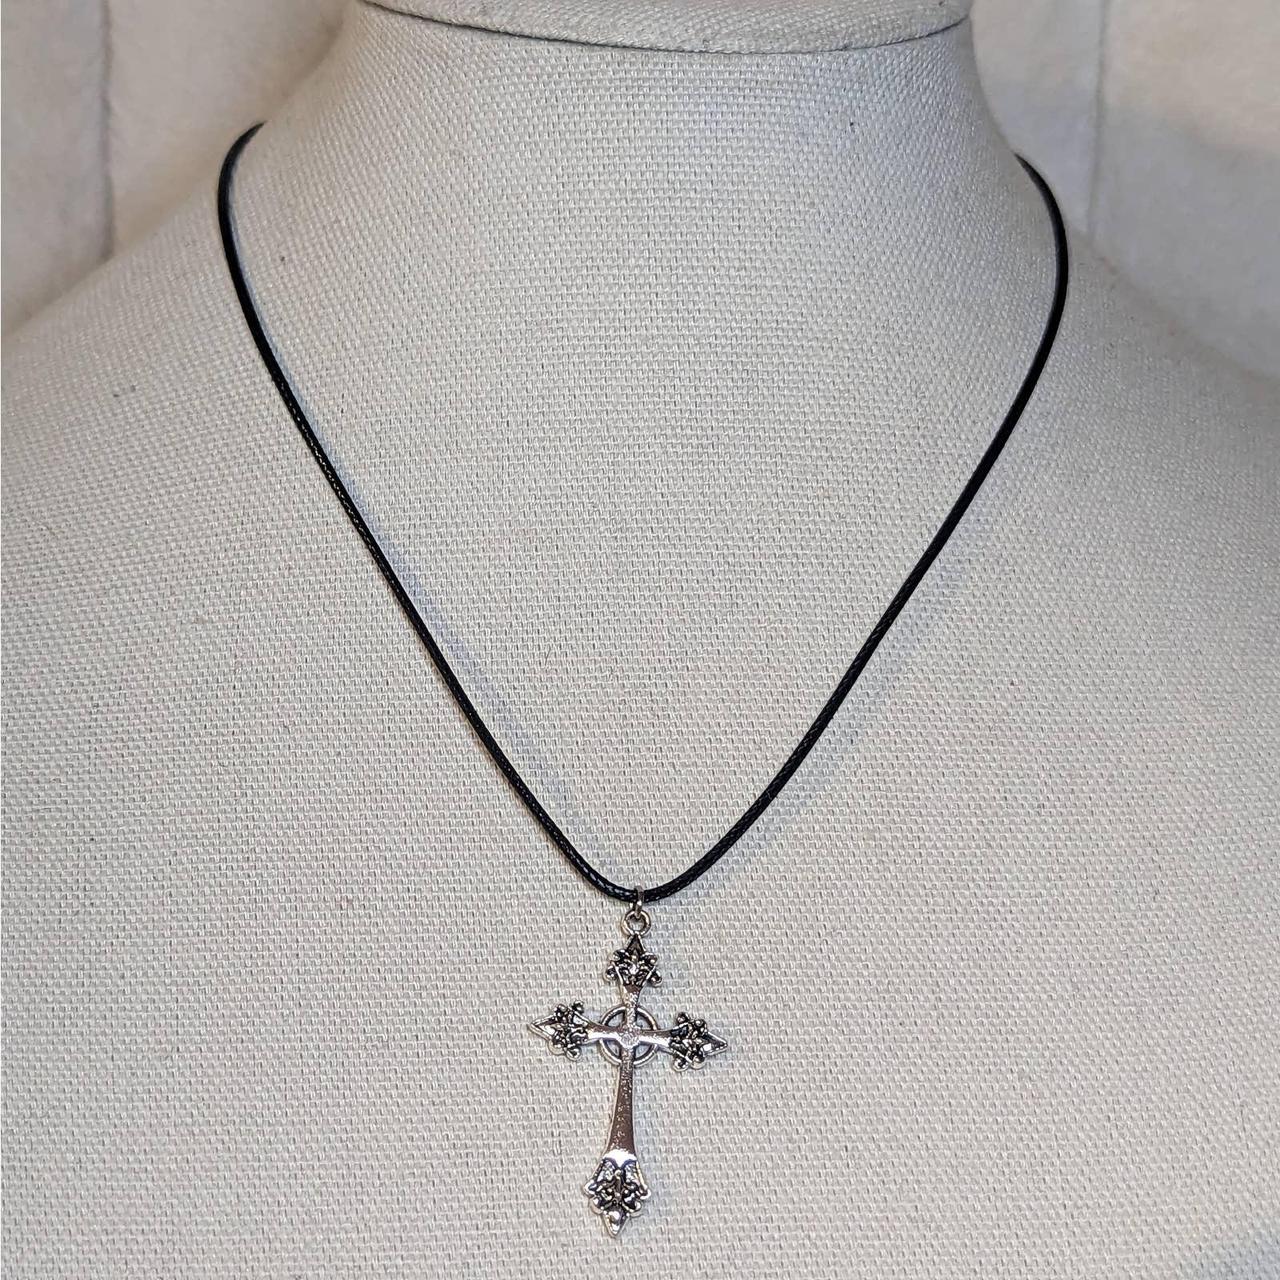 John 3:16 Cross Necklace Large -Handcrafted Sterling Silver by Lucina K.